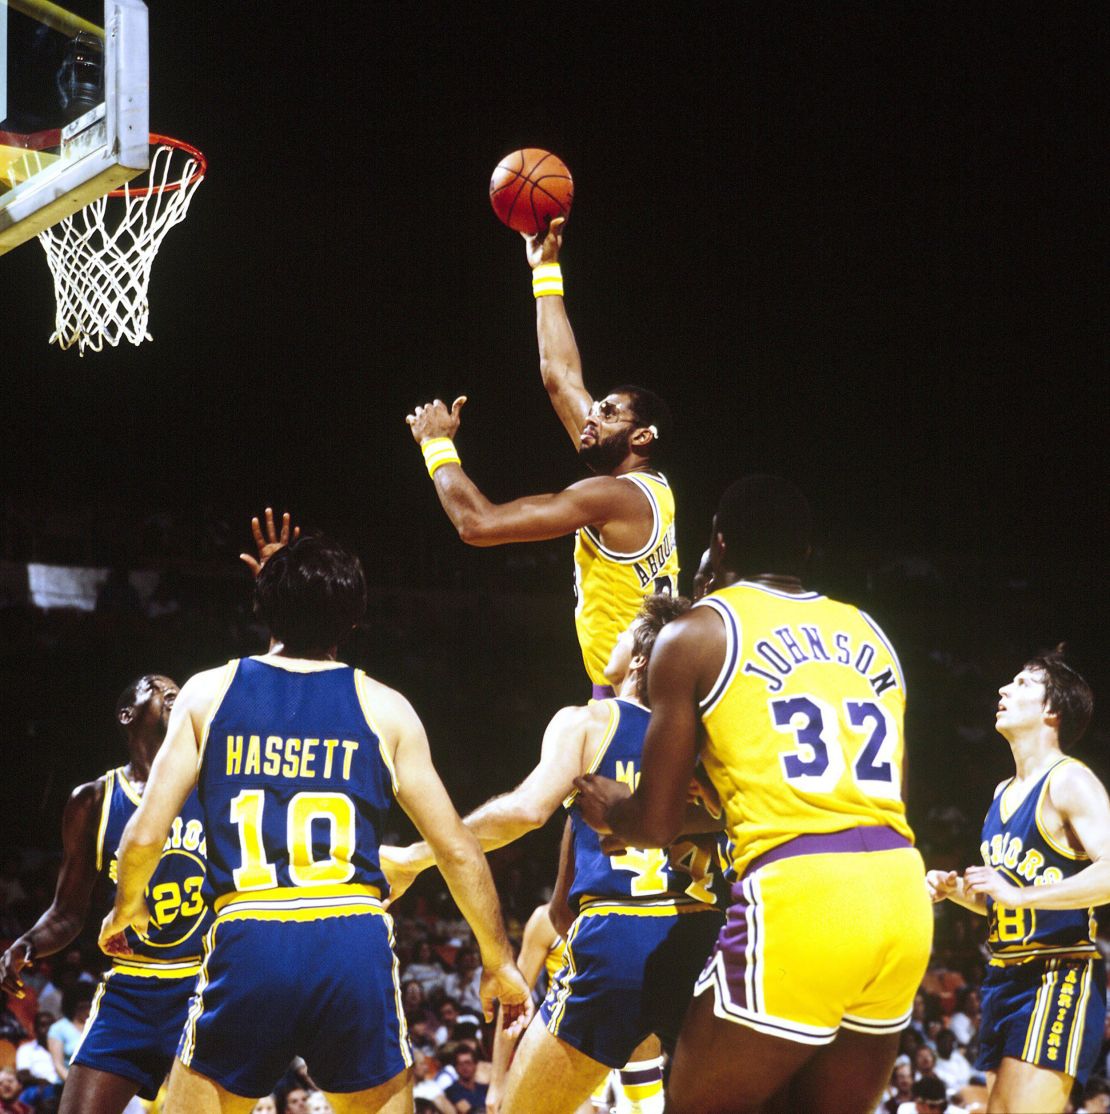 Abdul-Jabbar in action against the Golden State Warriors in 1982.